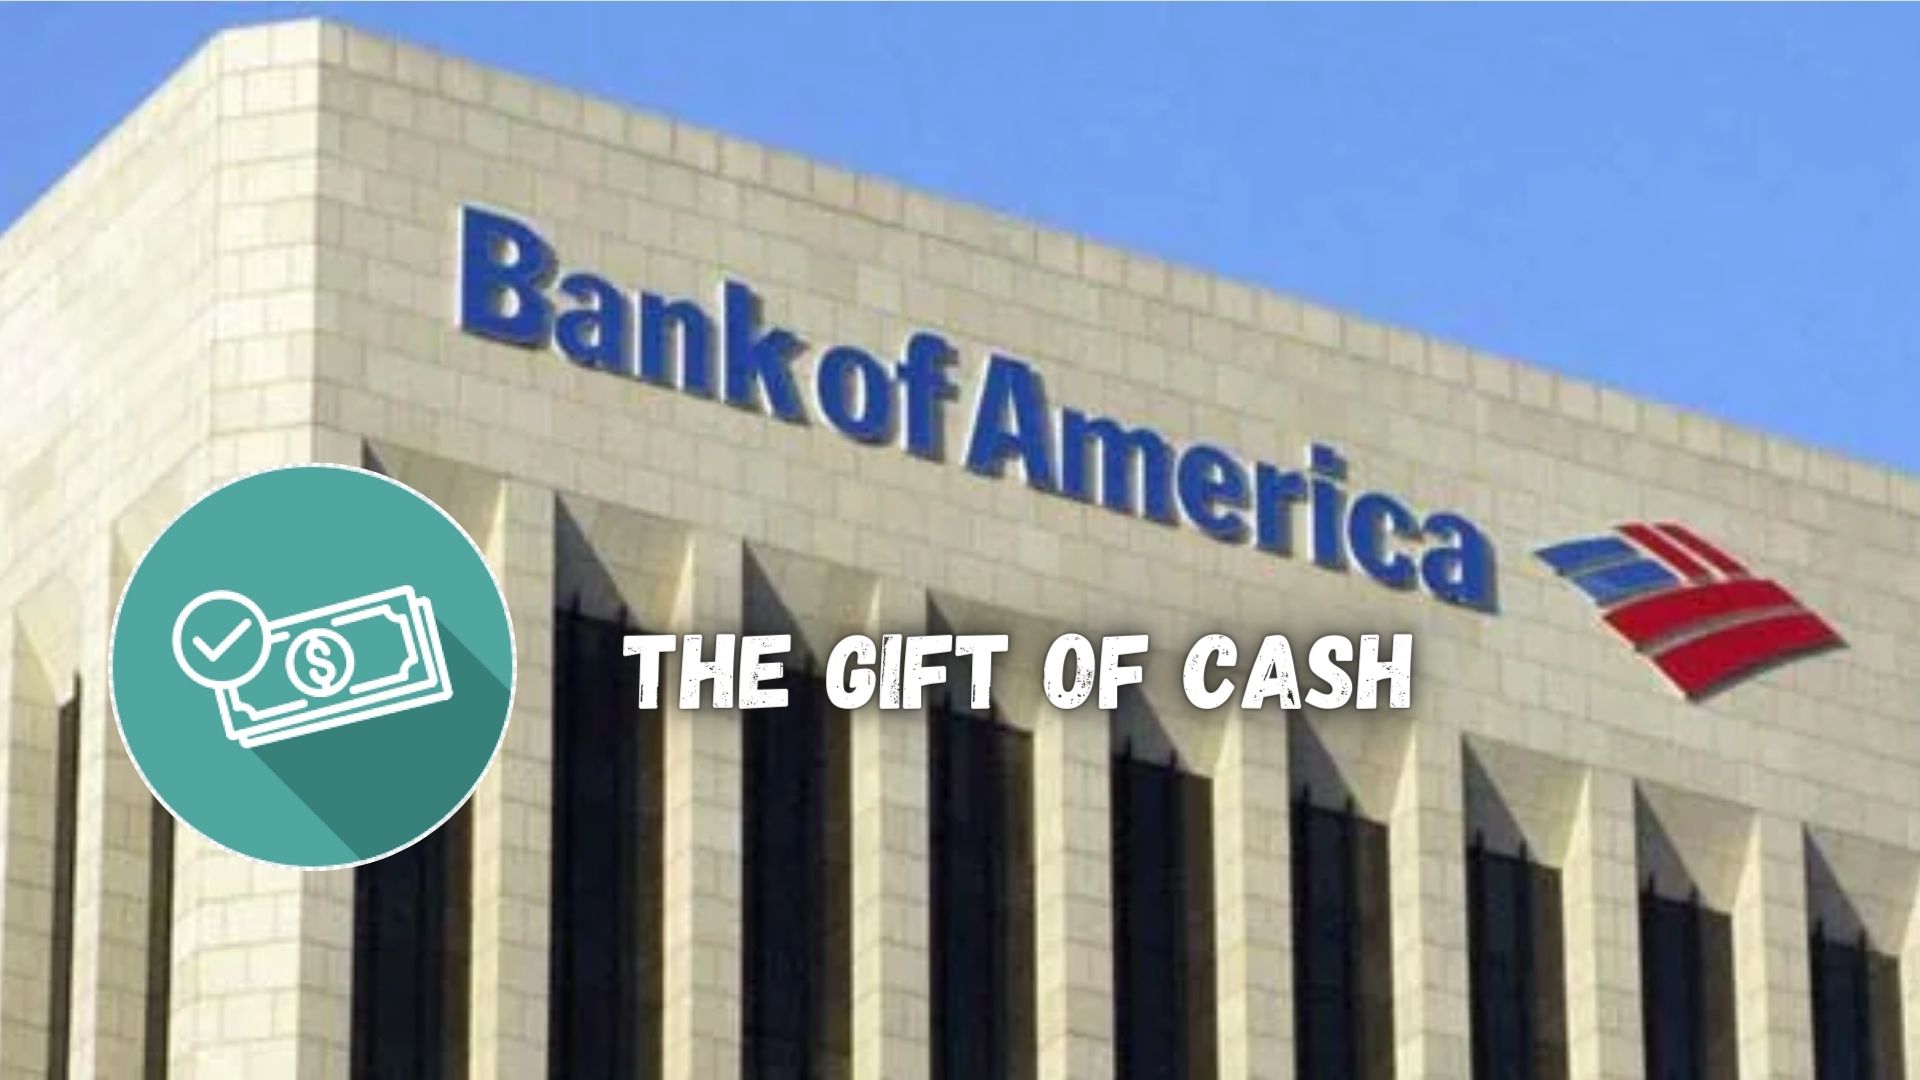 Bank of America Grant The Gift of Cash.